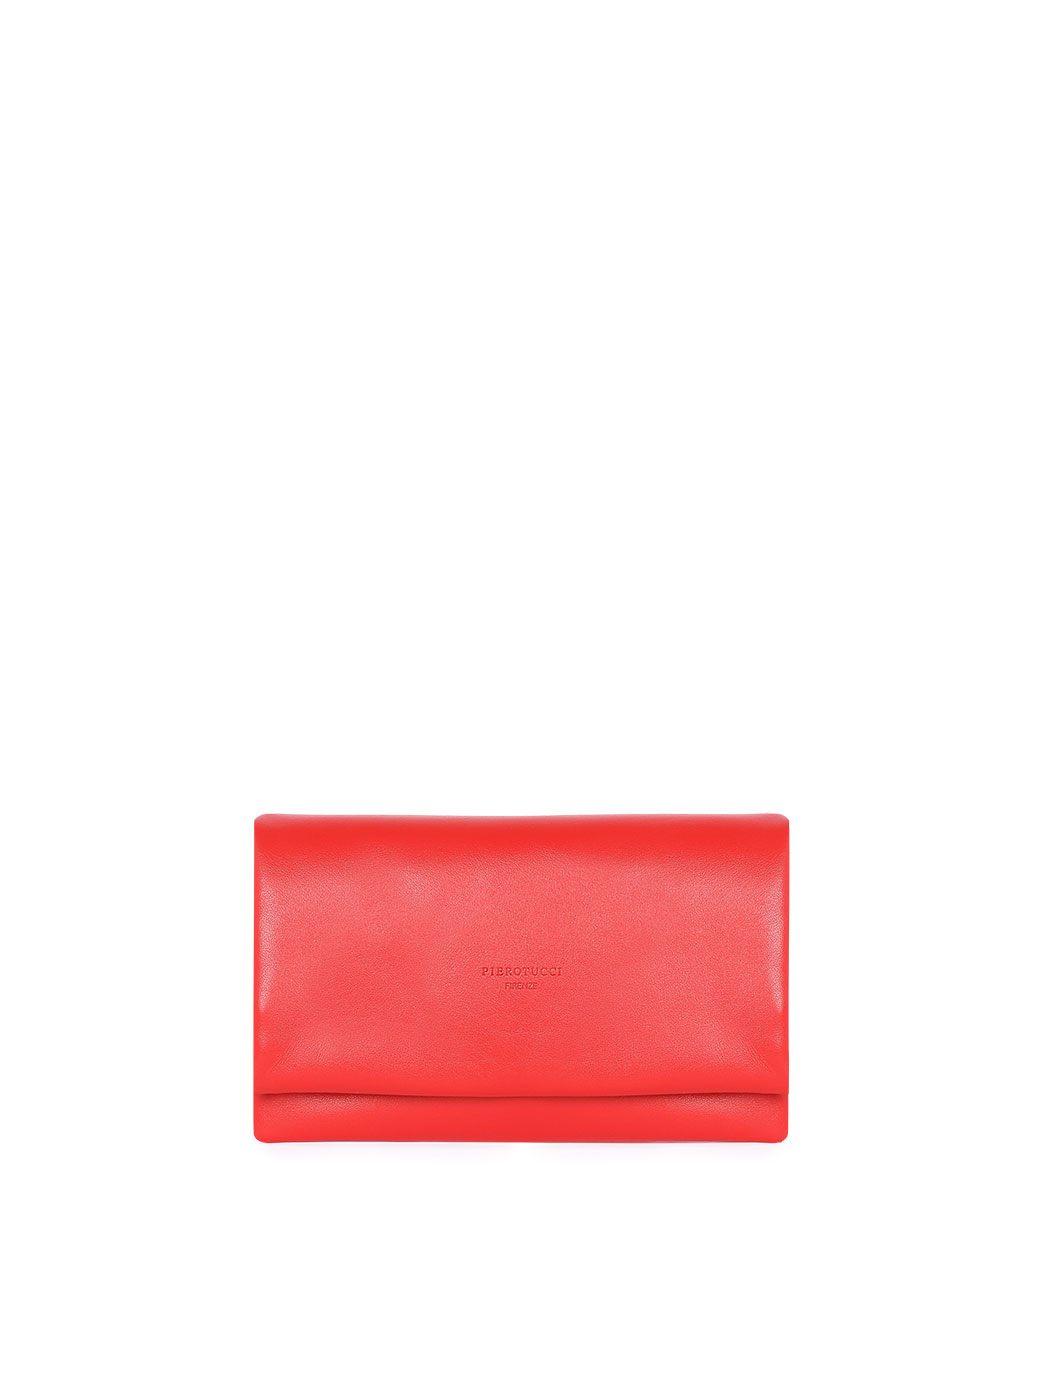 Small Foldover Clutch Purse Red